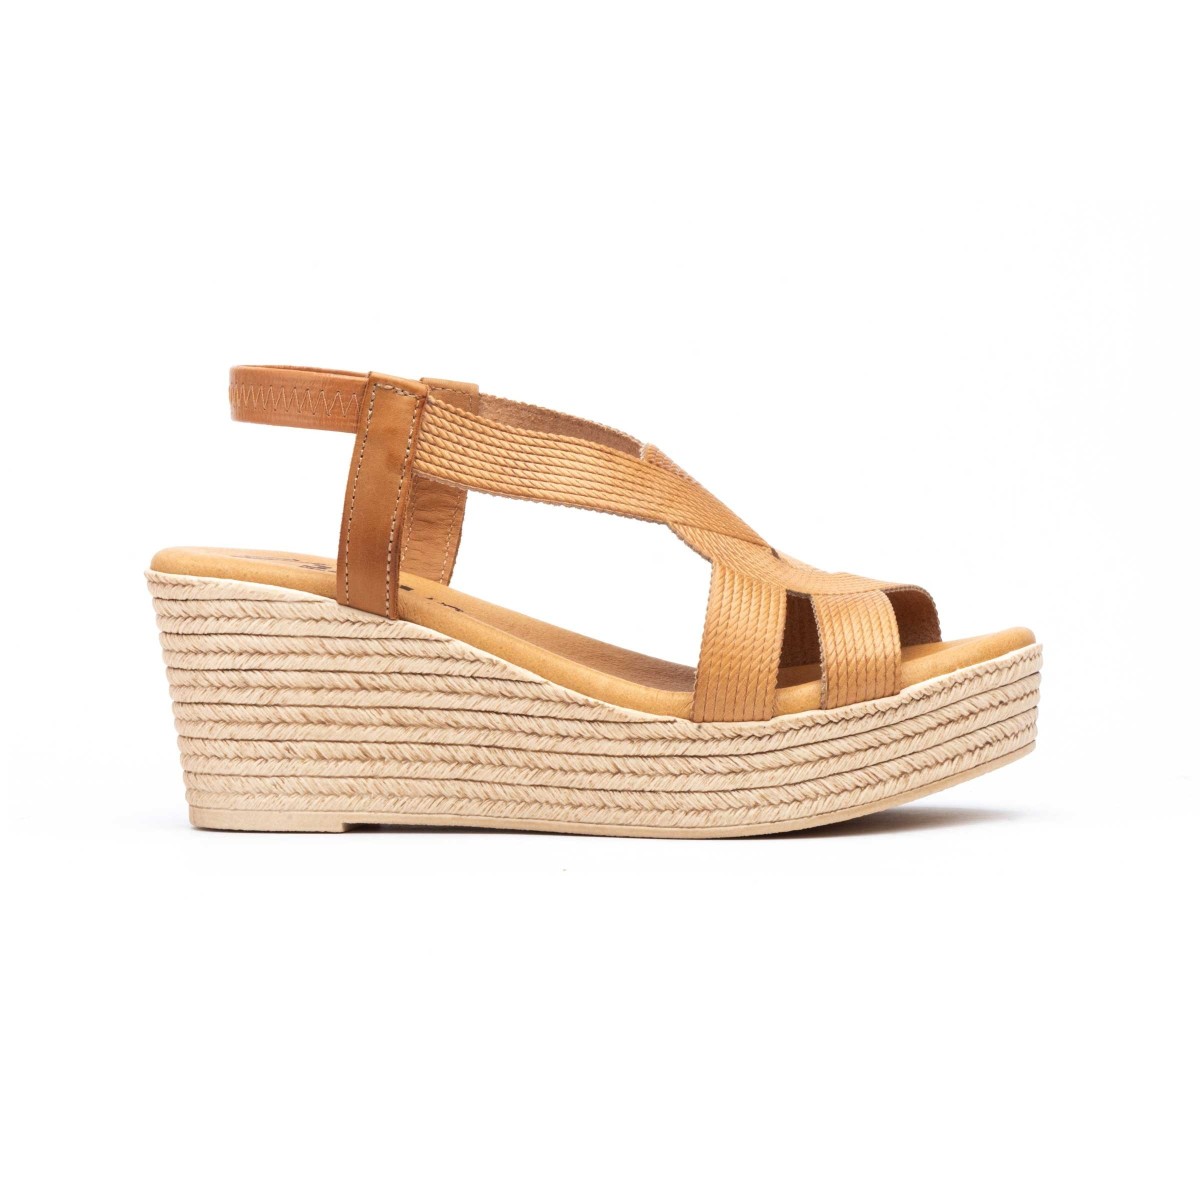 Gold leather sandals with high wedge by Blusandal